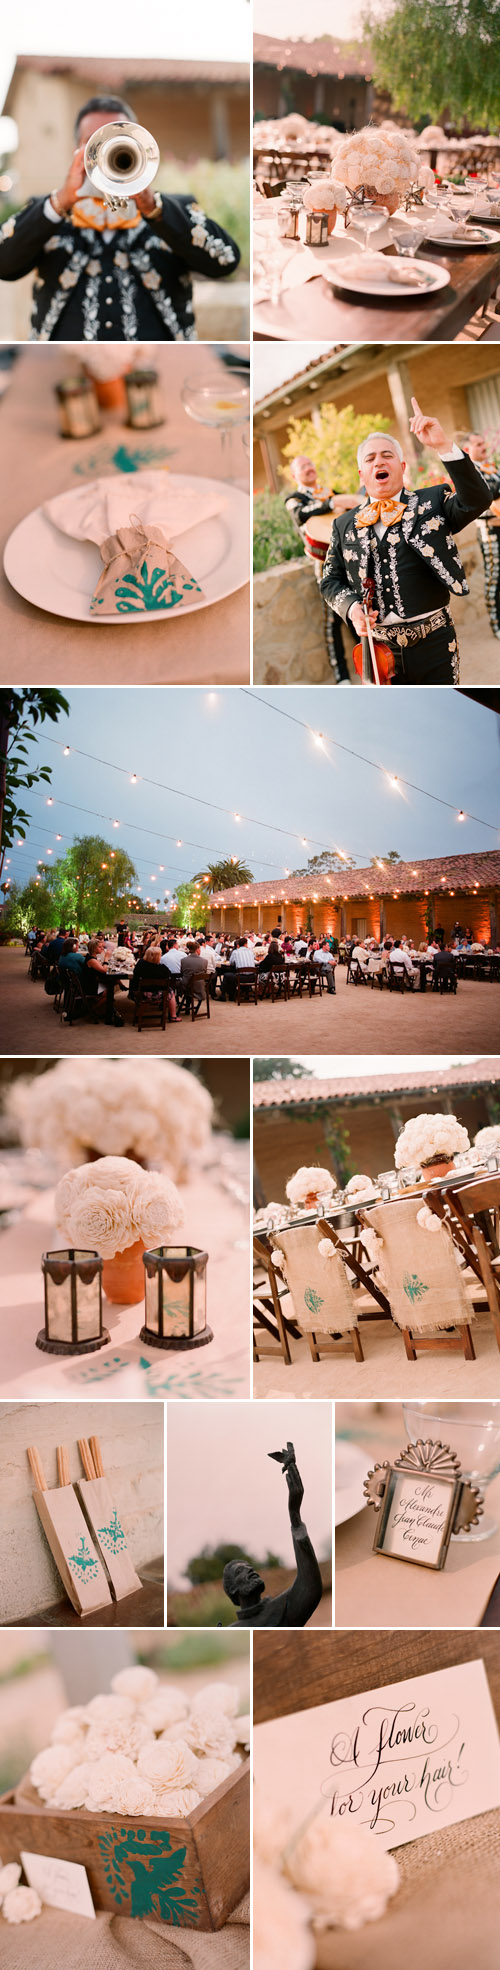 stylish mexican inspired real wedding rehearsal dinner, images by Beaux Arts Photographie